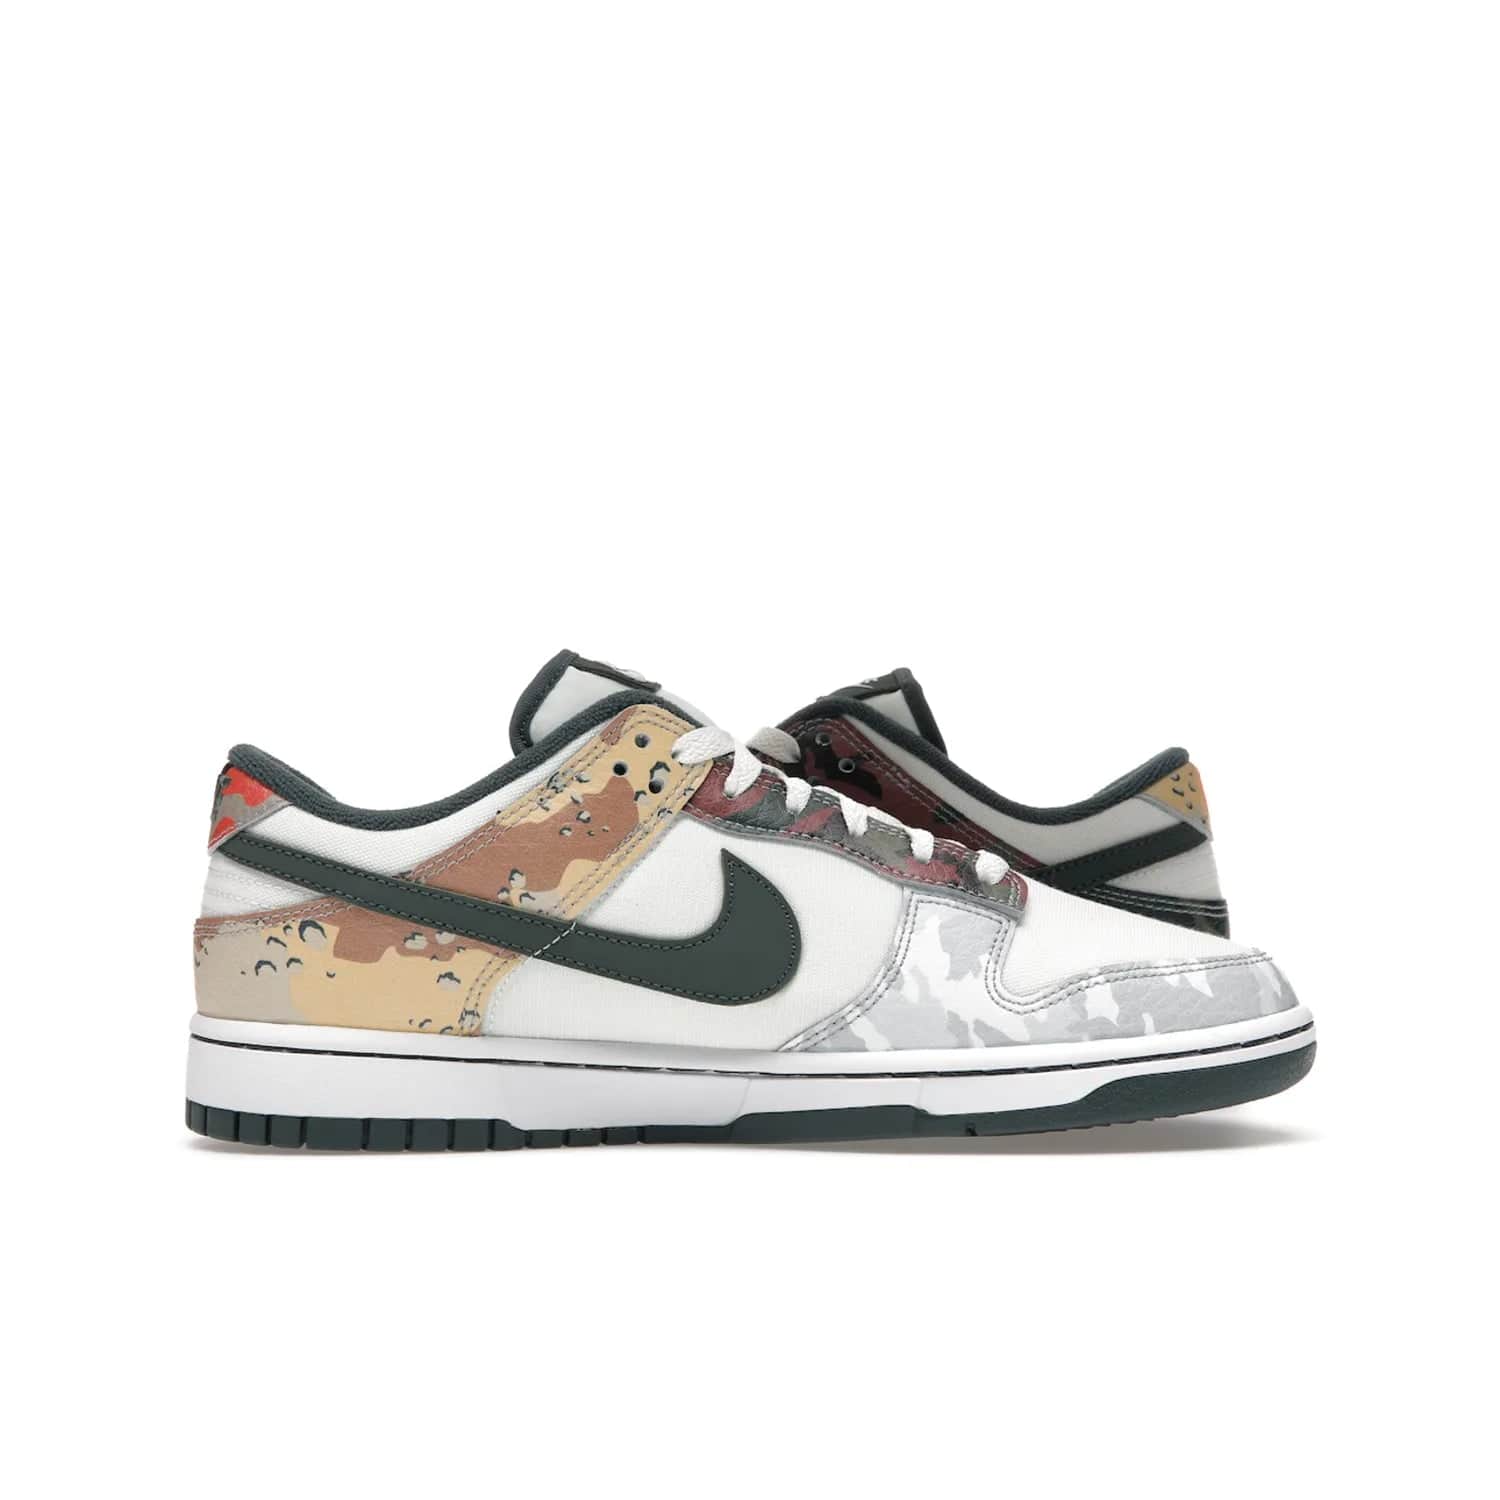 Nike Dunk Low SE Sail Multi-Camo - Image 19 - Only at www.BallersClubKickz.com - Classic design meets statement style in the Nike Dunk Low SE Sail Multi-Camo. White leather base with multi-color camo overlays, vibrant Nike Swooshes, and orange Nike embroidery. Get yours August 2021.